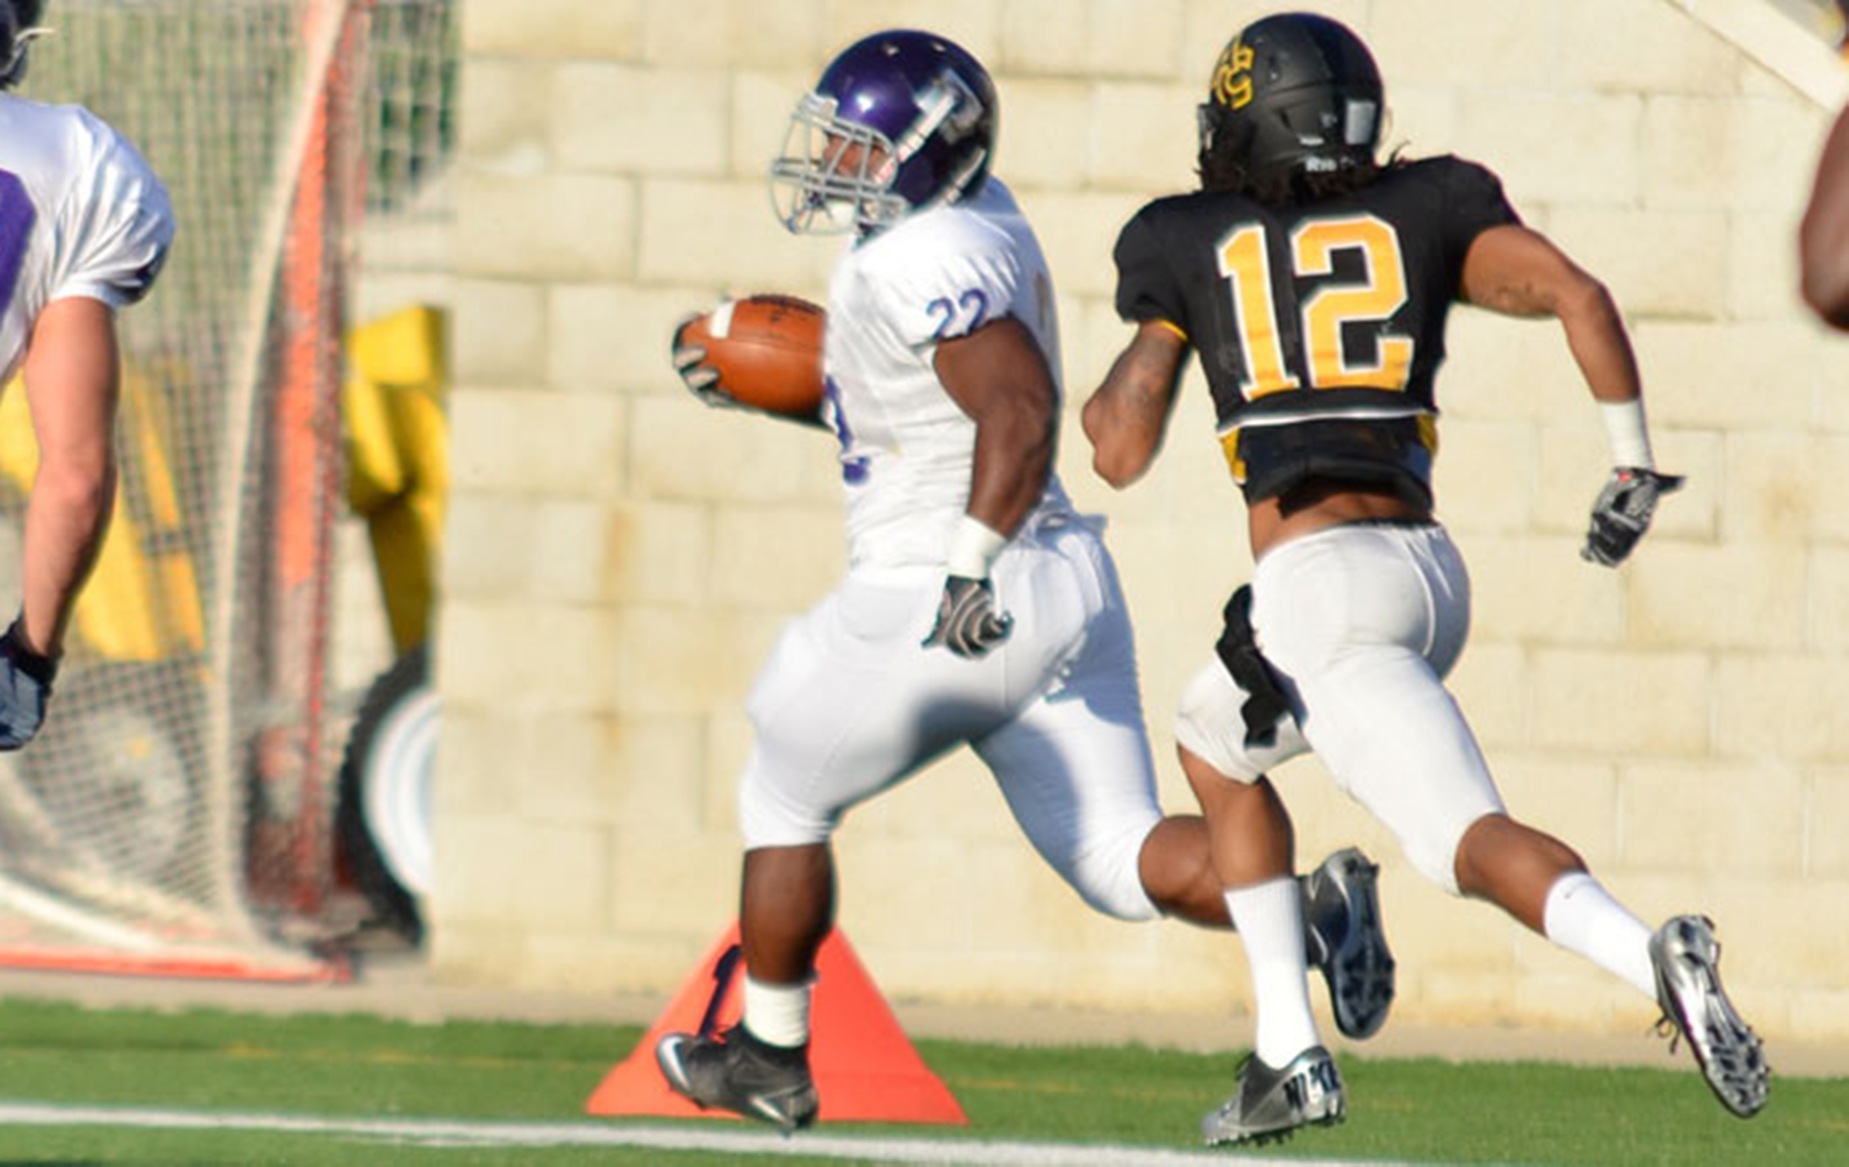 DC's Aaron Smith Runs Away with HCAC Top Play Honors